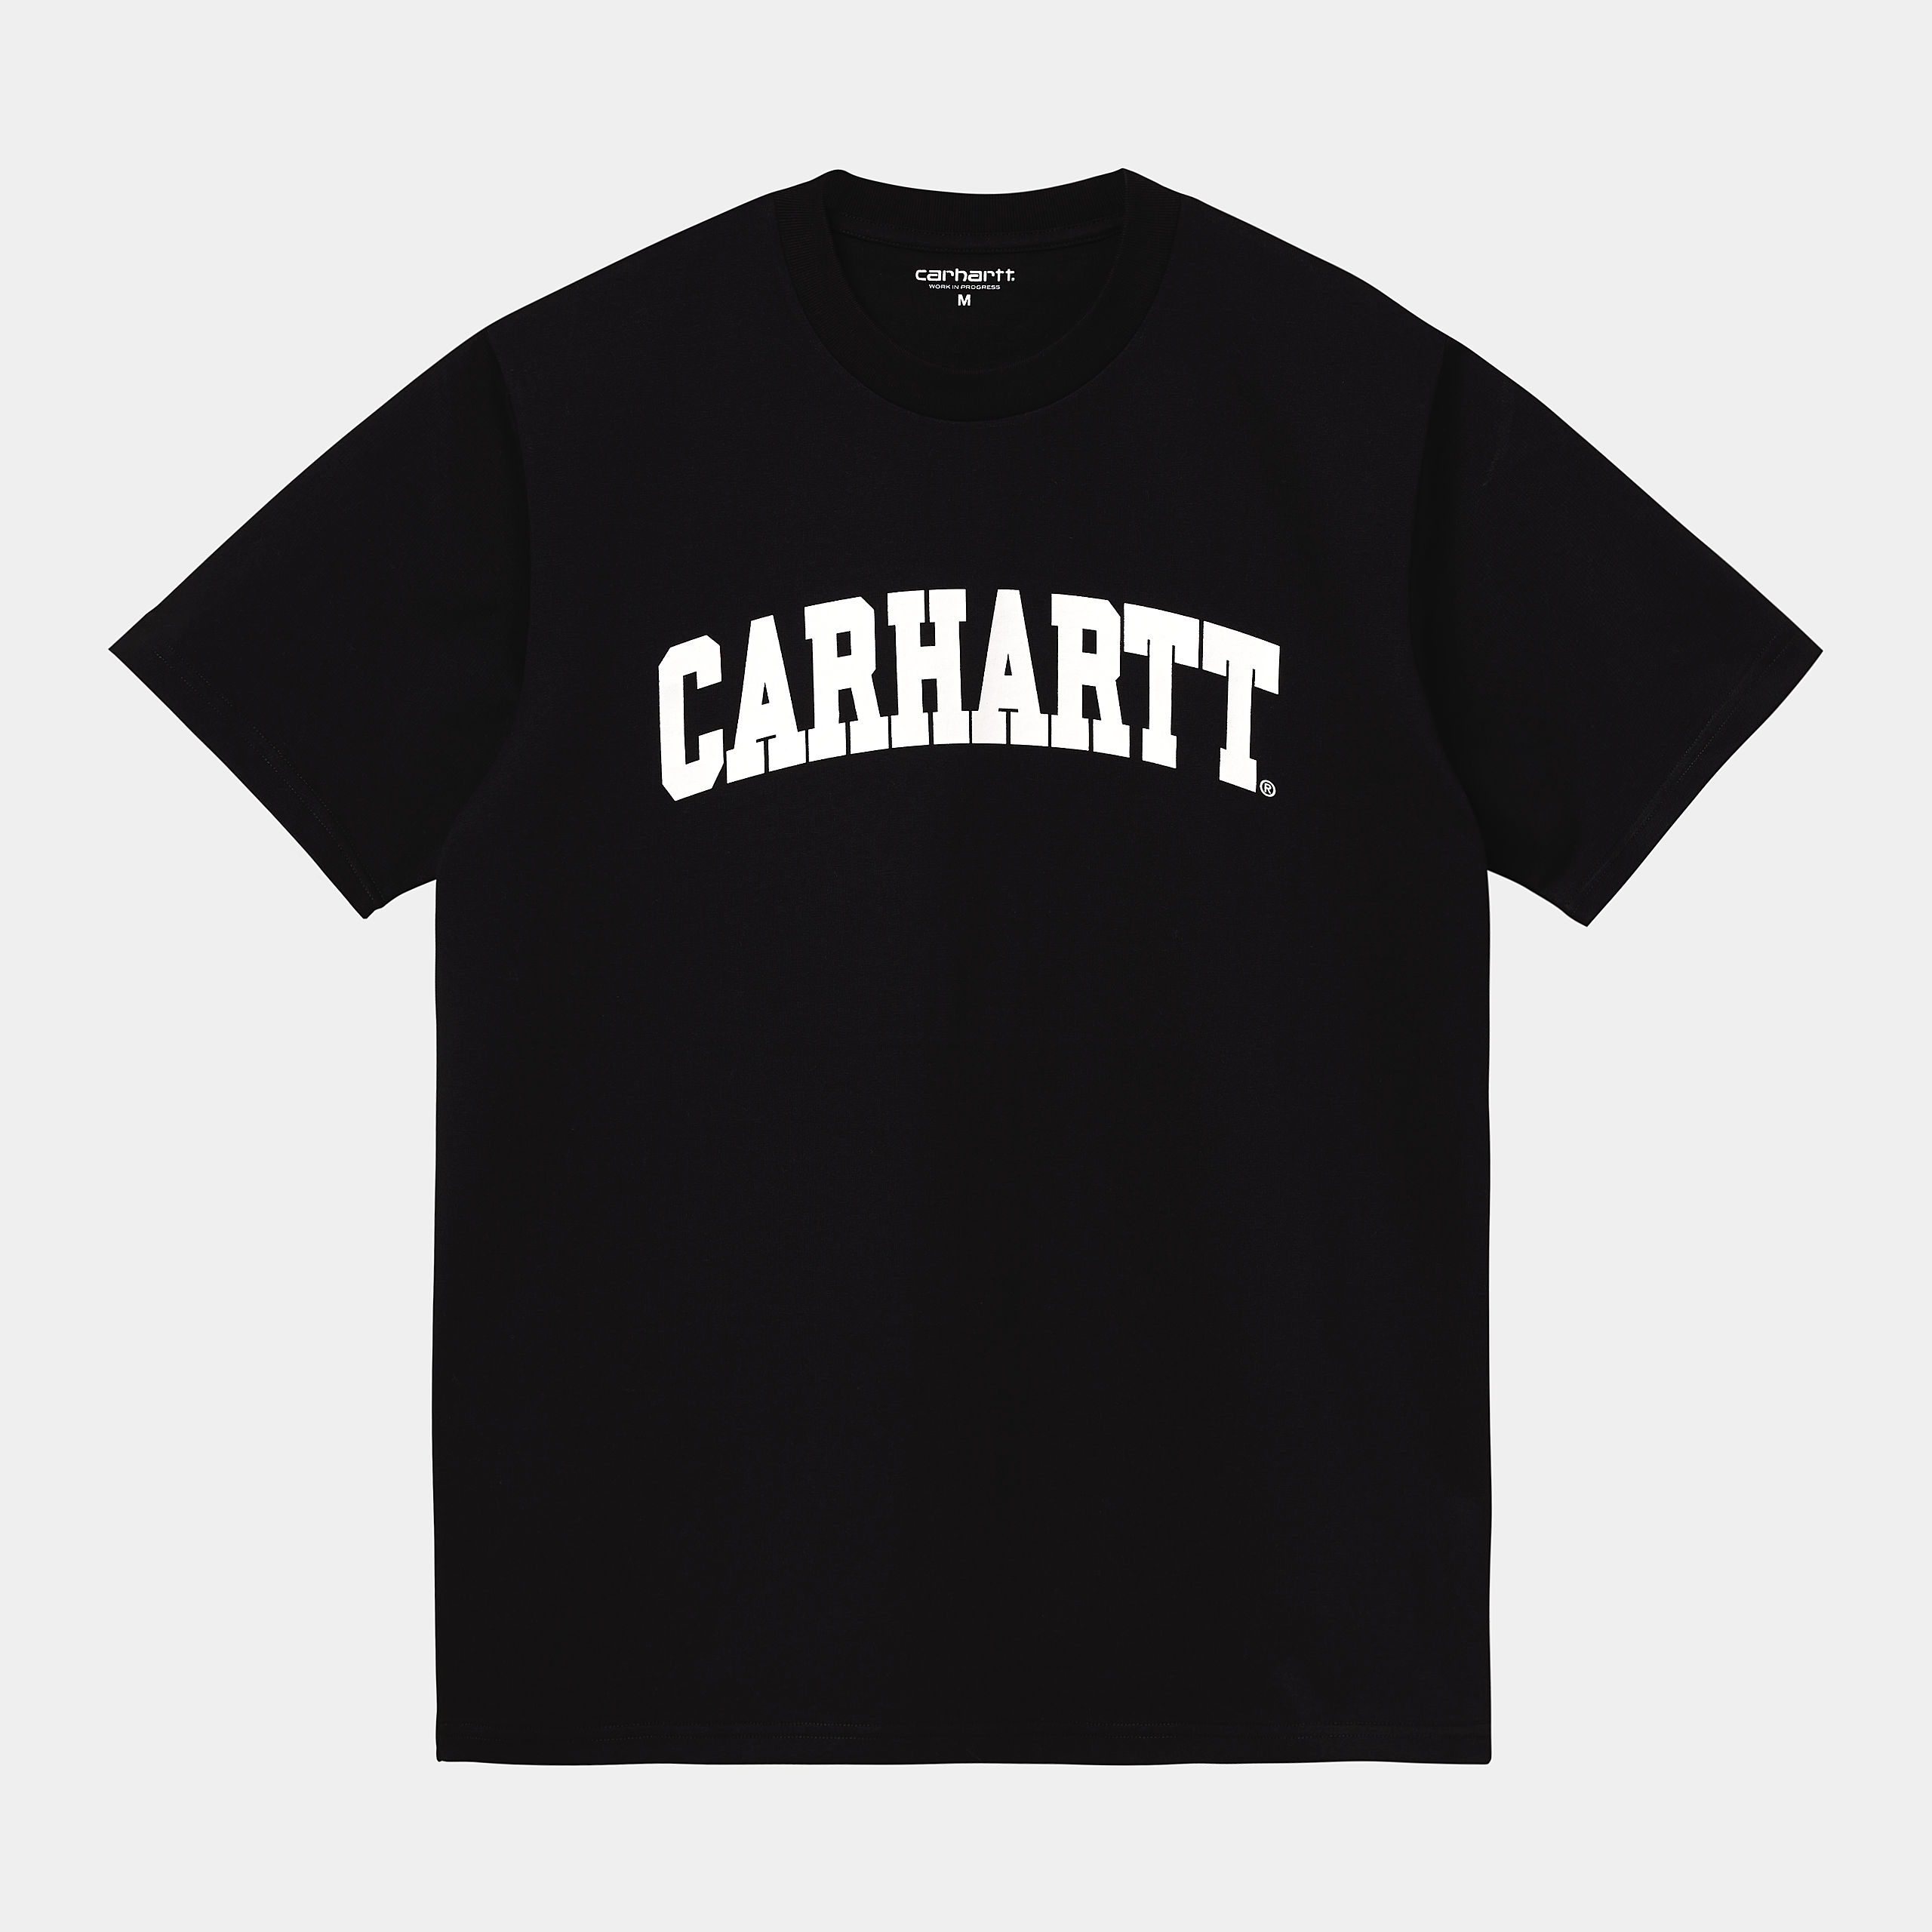 Embracing Durability: The Carhartt Approach to Design